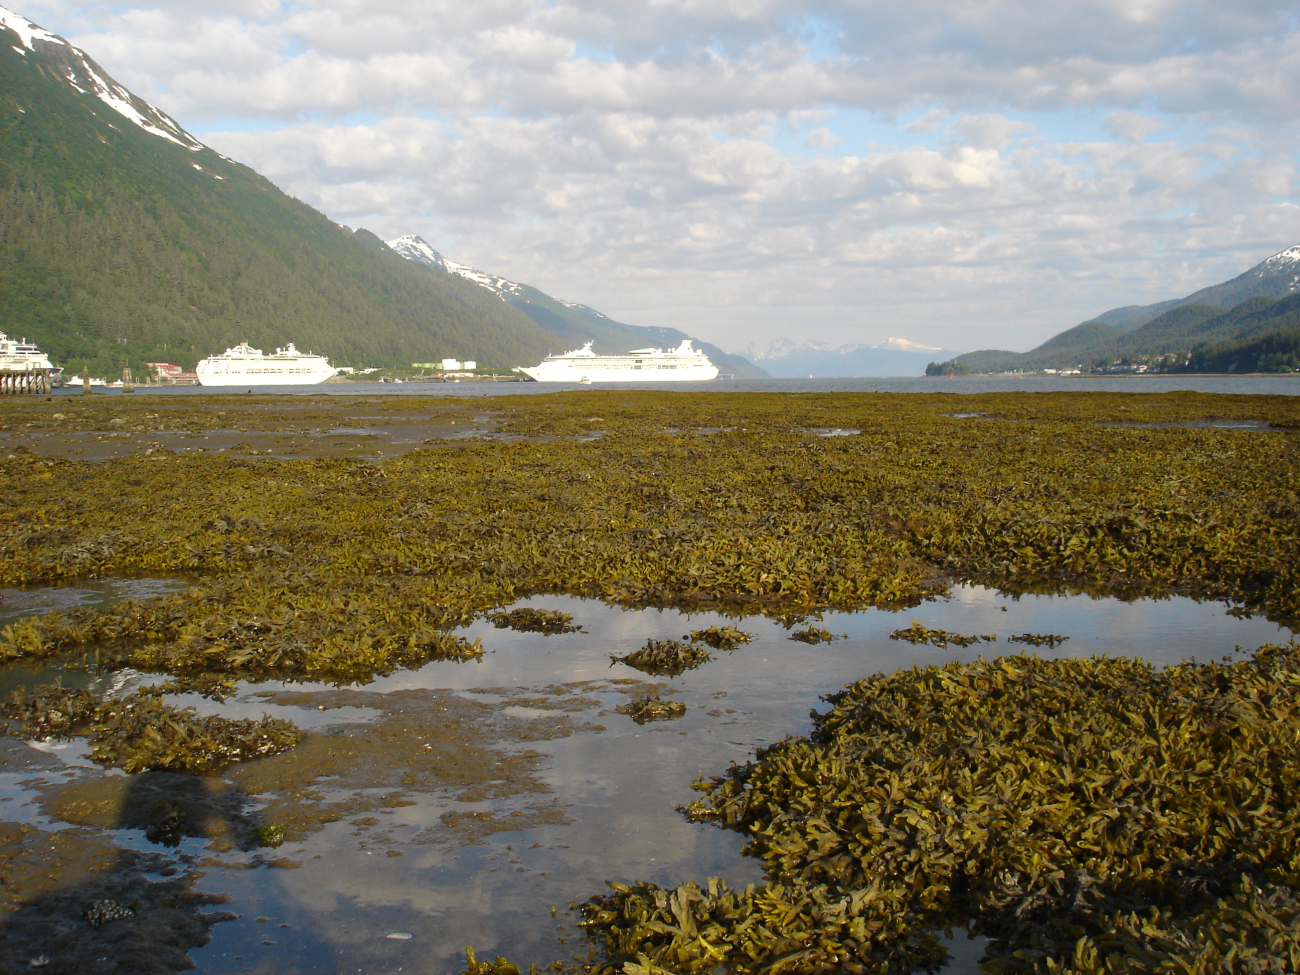 Looking over an algae covered tidal flat at low tide towards the Juneau cruiseship docks